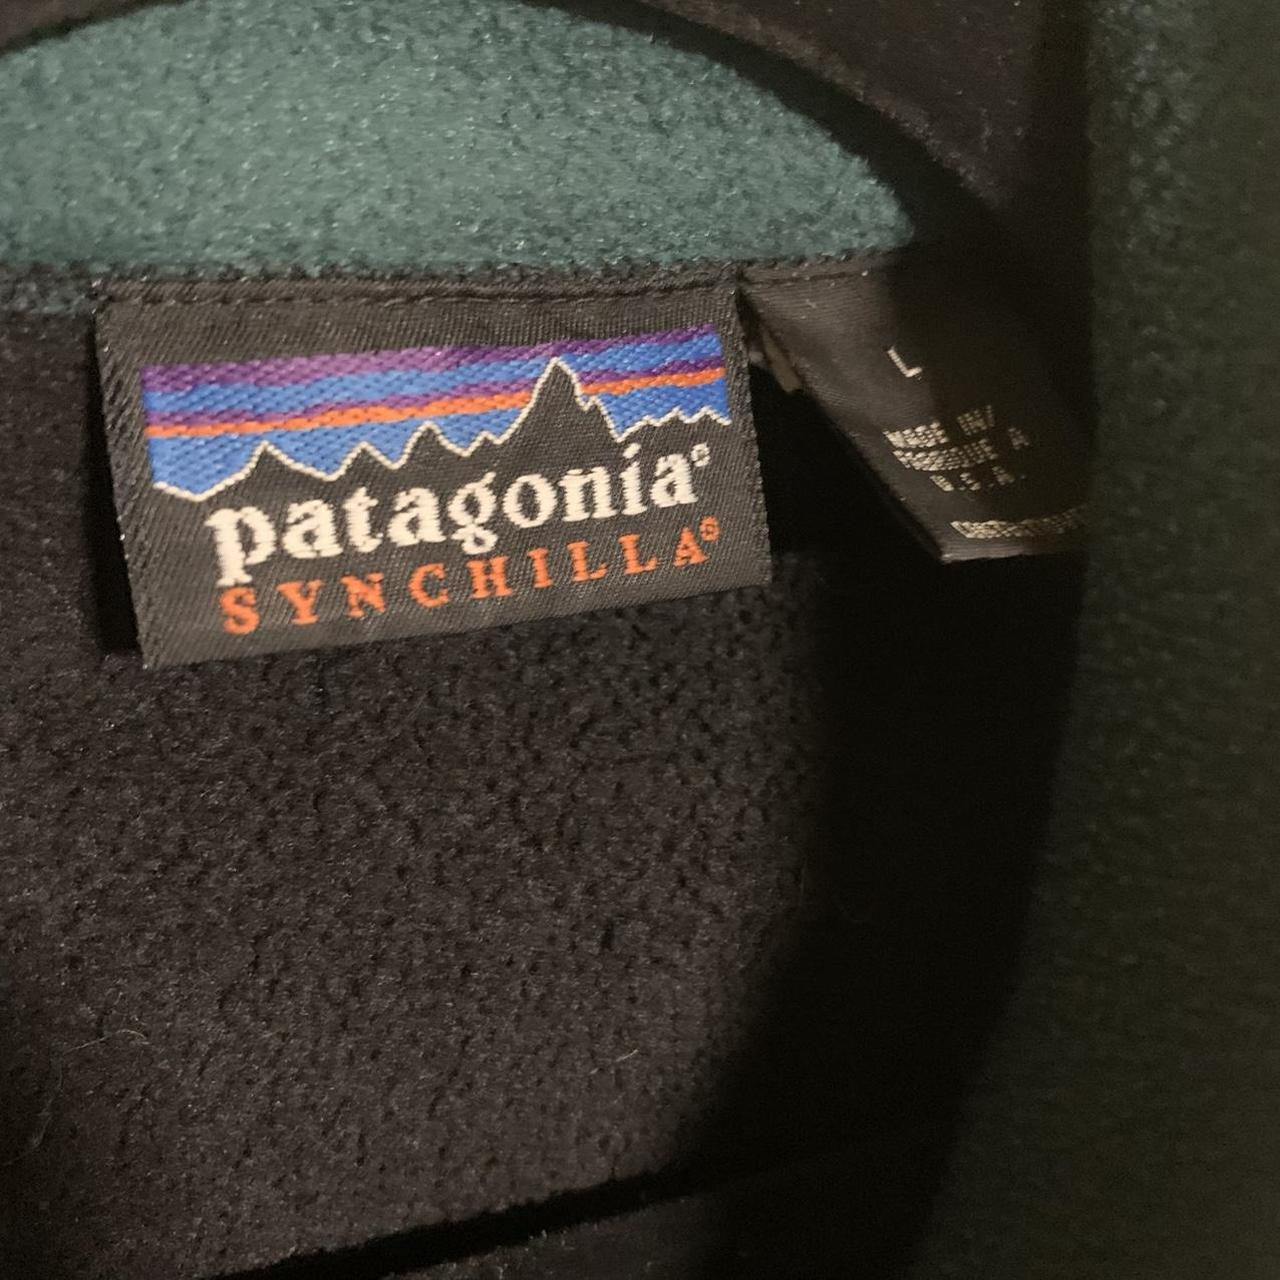 Vintage 80s 1986 Patagonia synchilla made in usa... - Depop